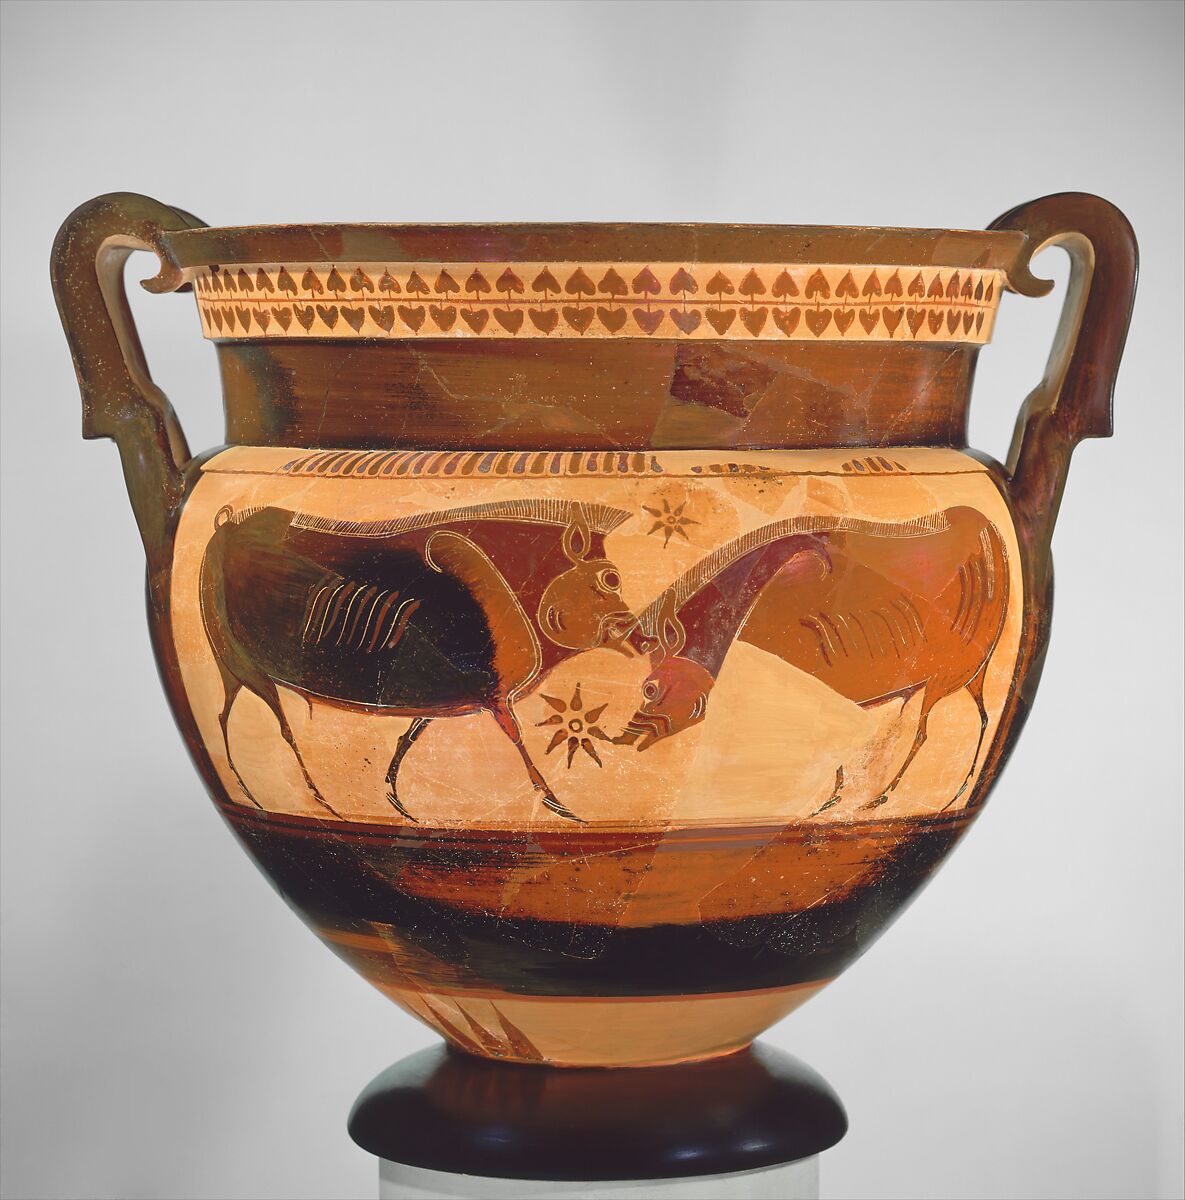 Terracotta volute-krater (vase for mixing wine and water), Attributed to Sophilos, Terracotta, Greek, Attic 